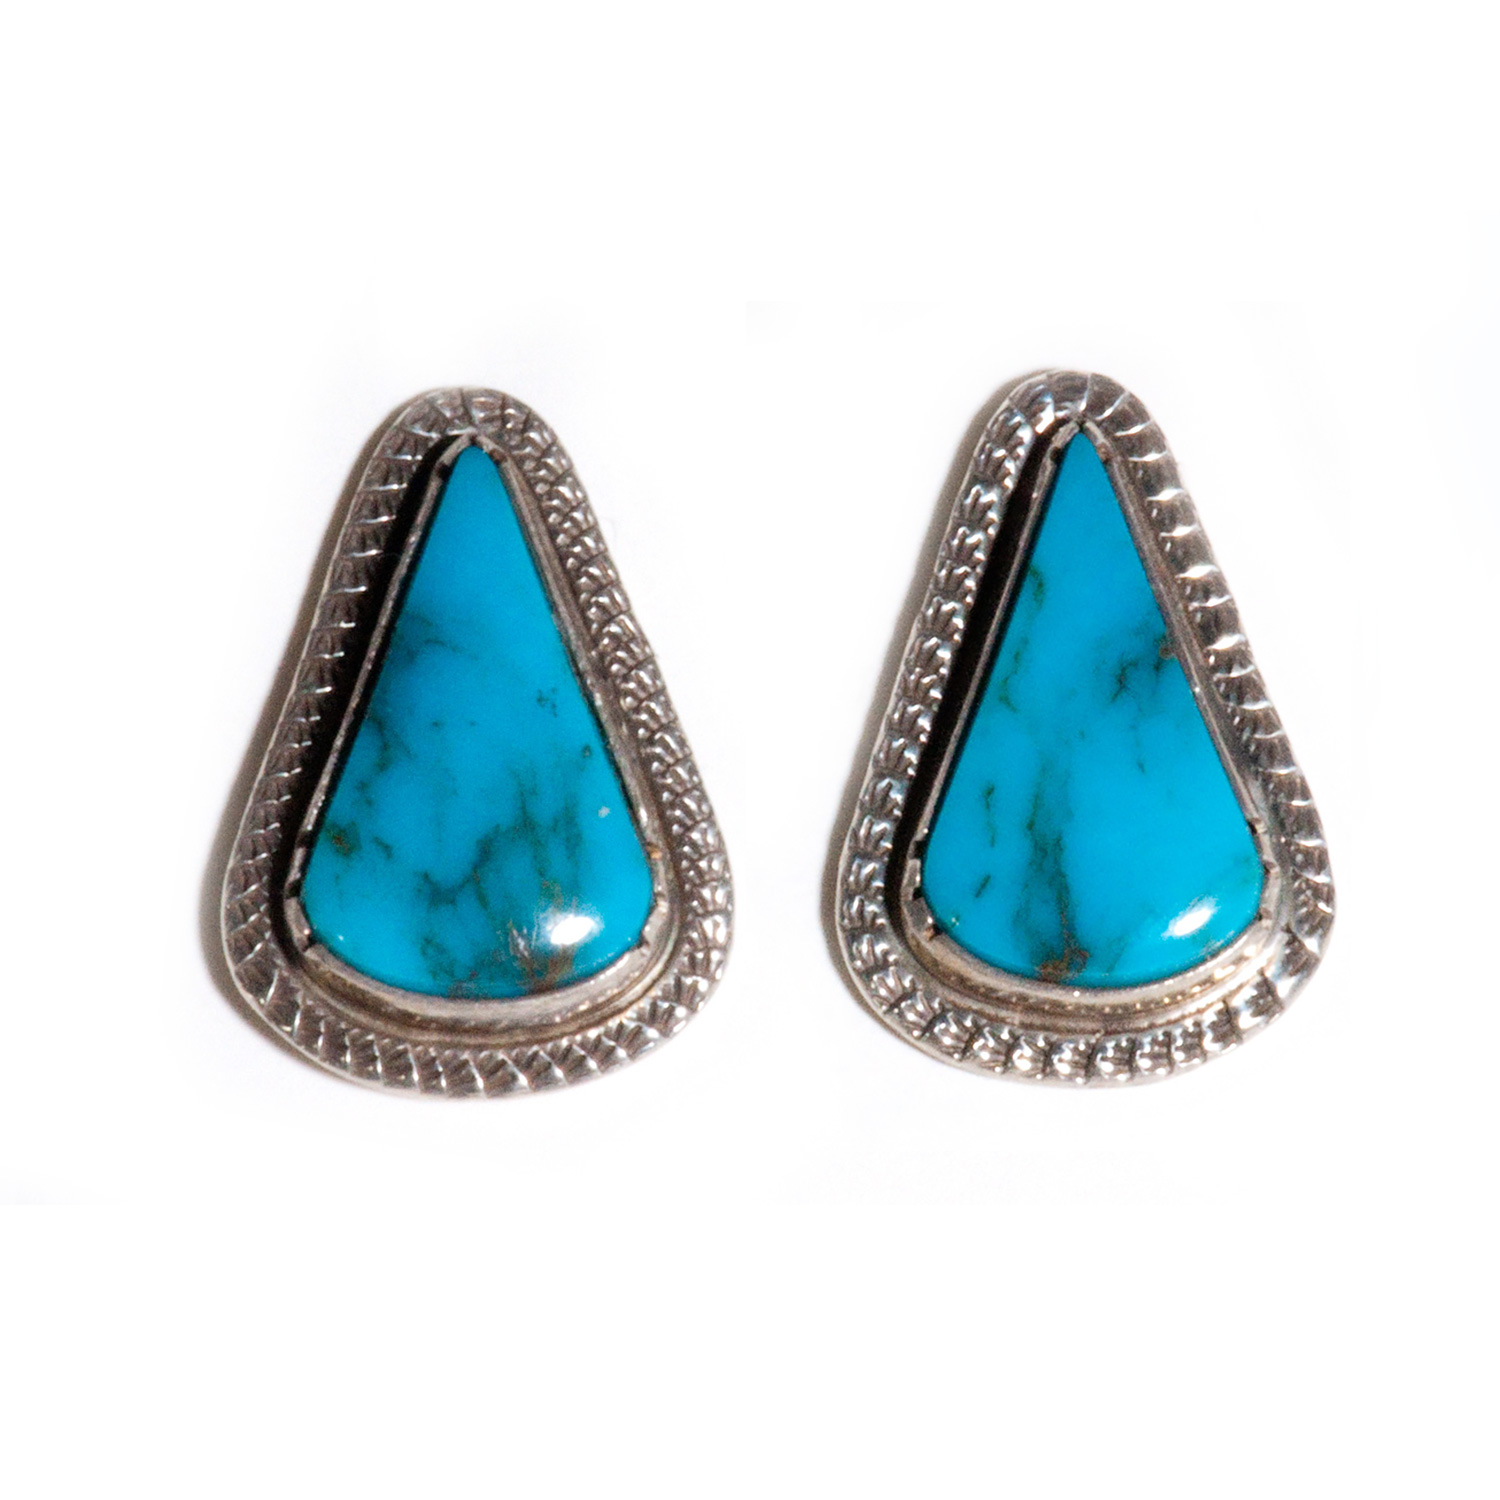 New turquoise silver earrings